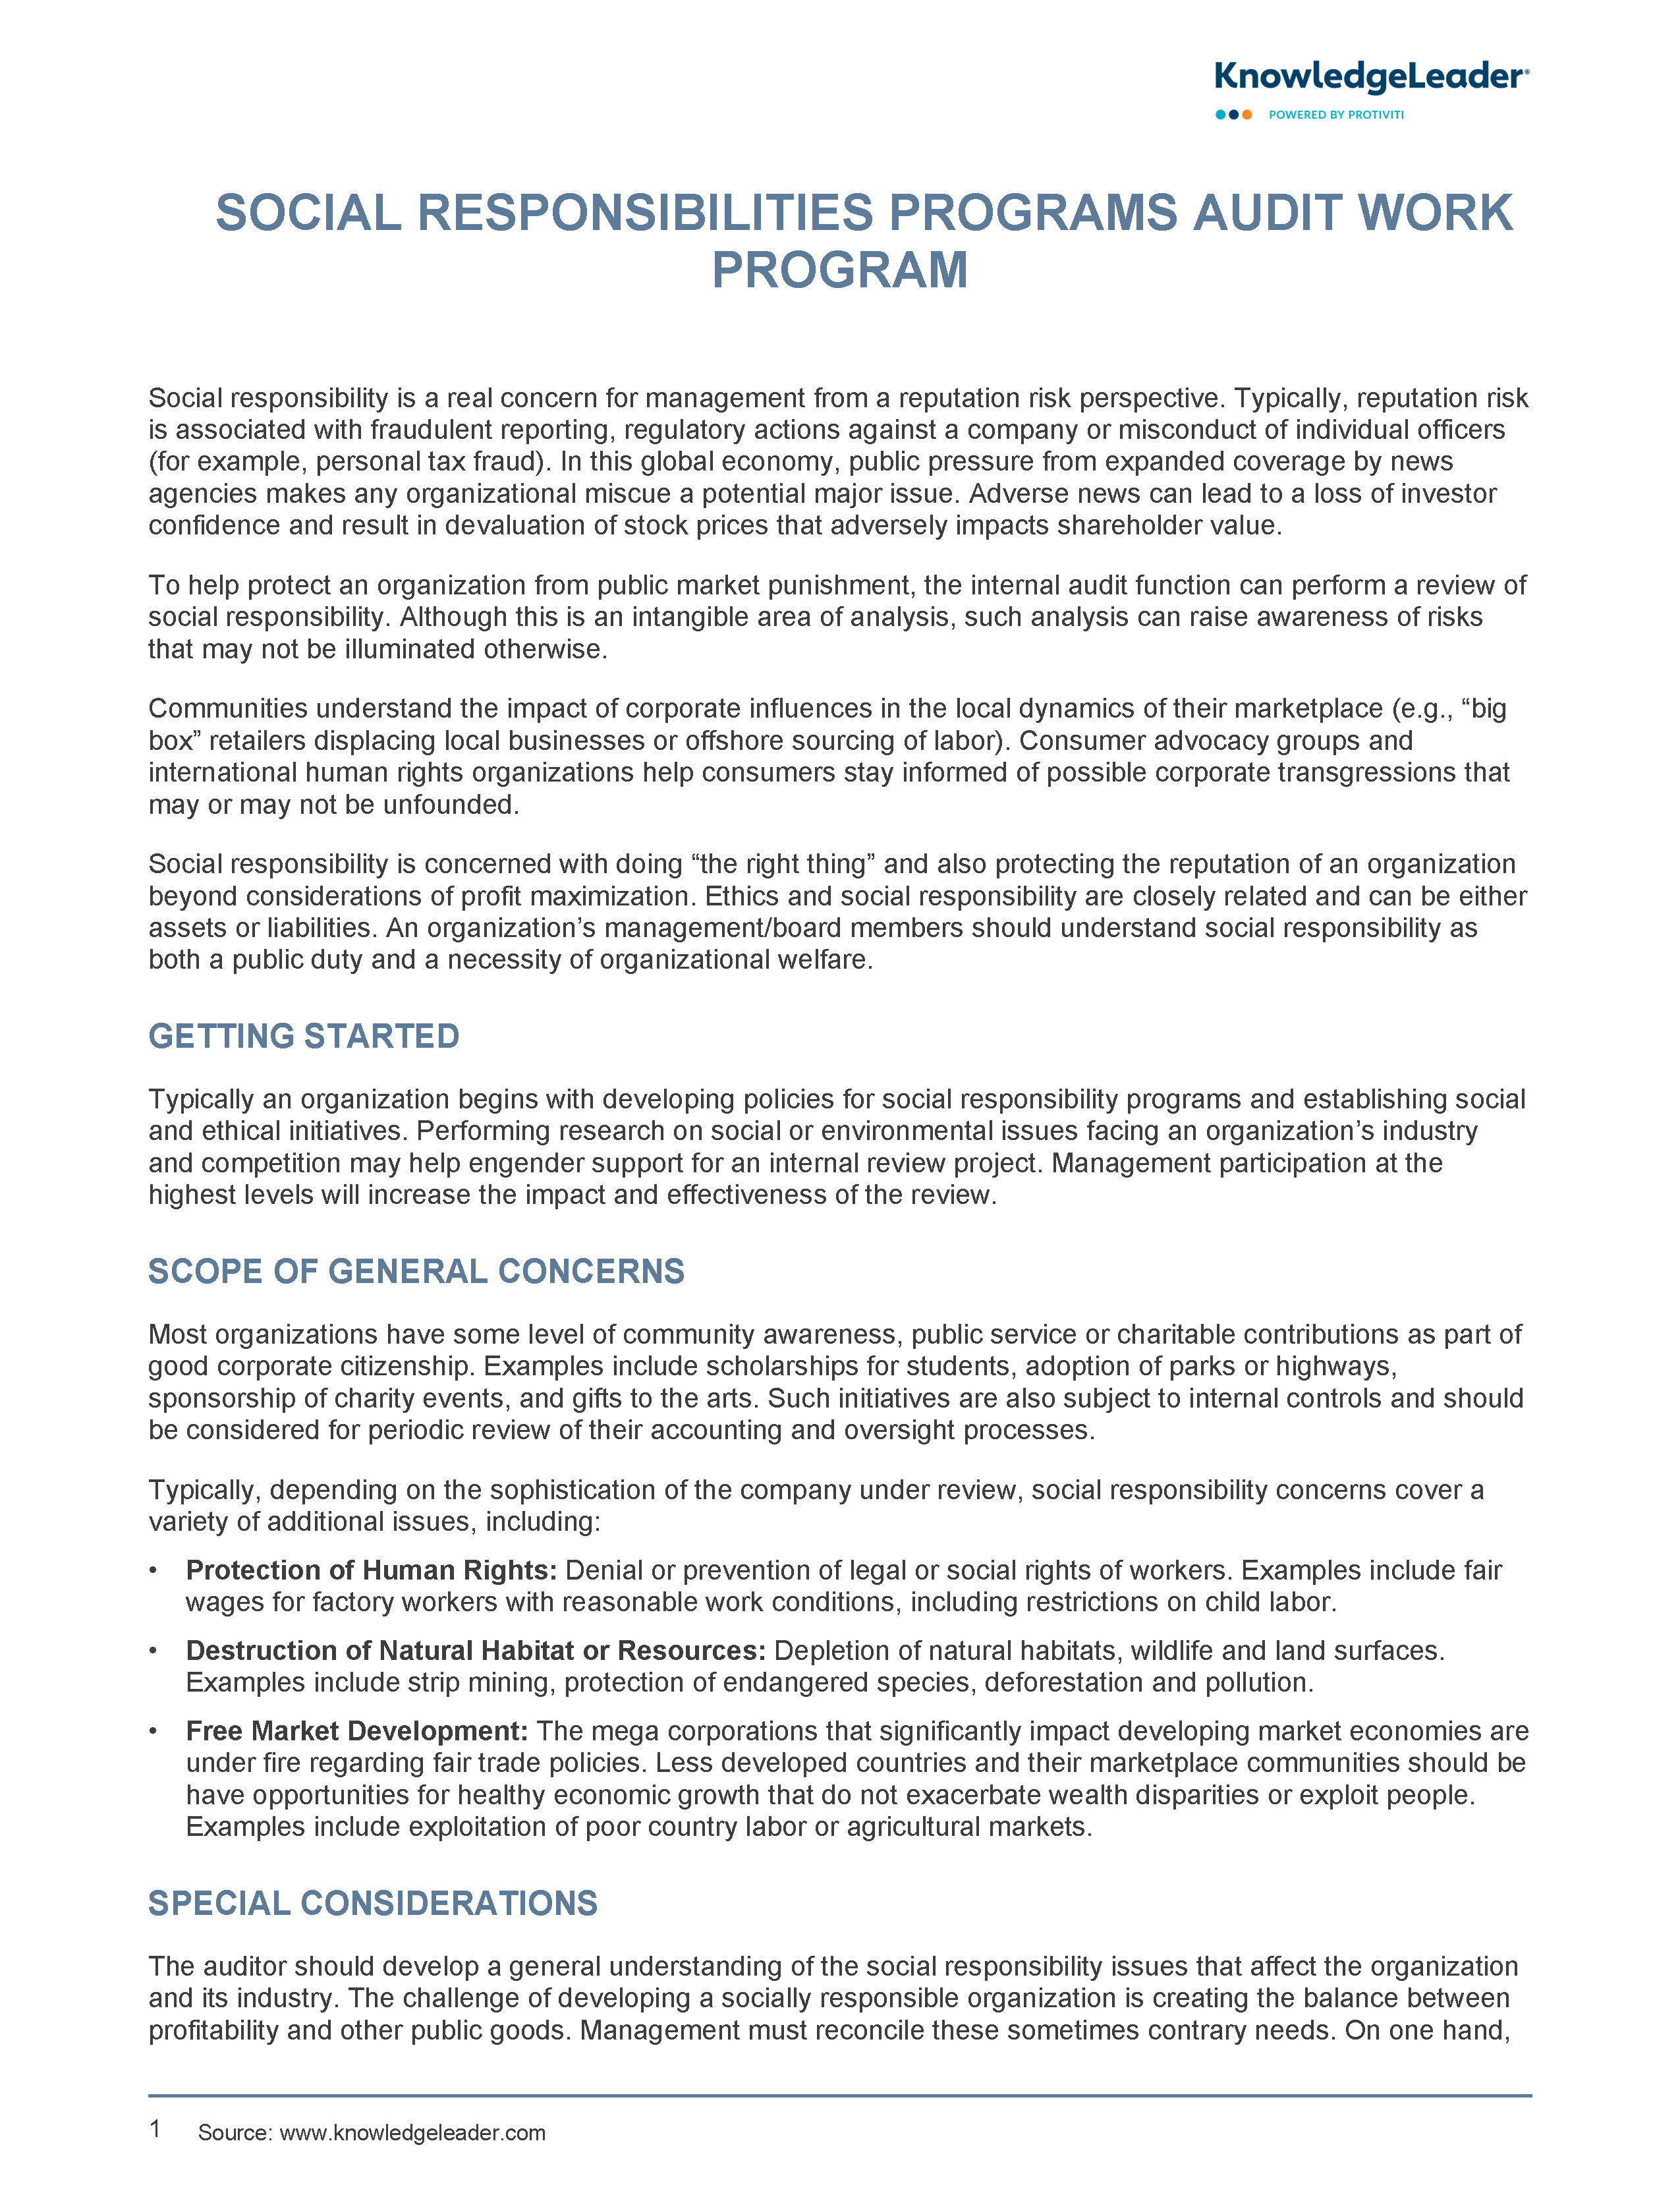 Screenshot of the first page of Social Responsibilities Programs Work Program